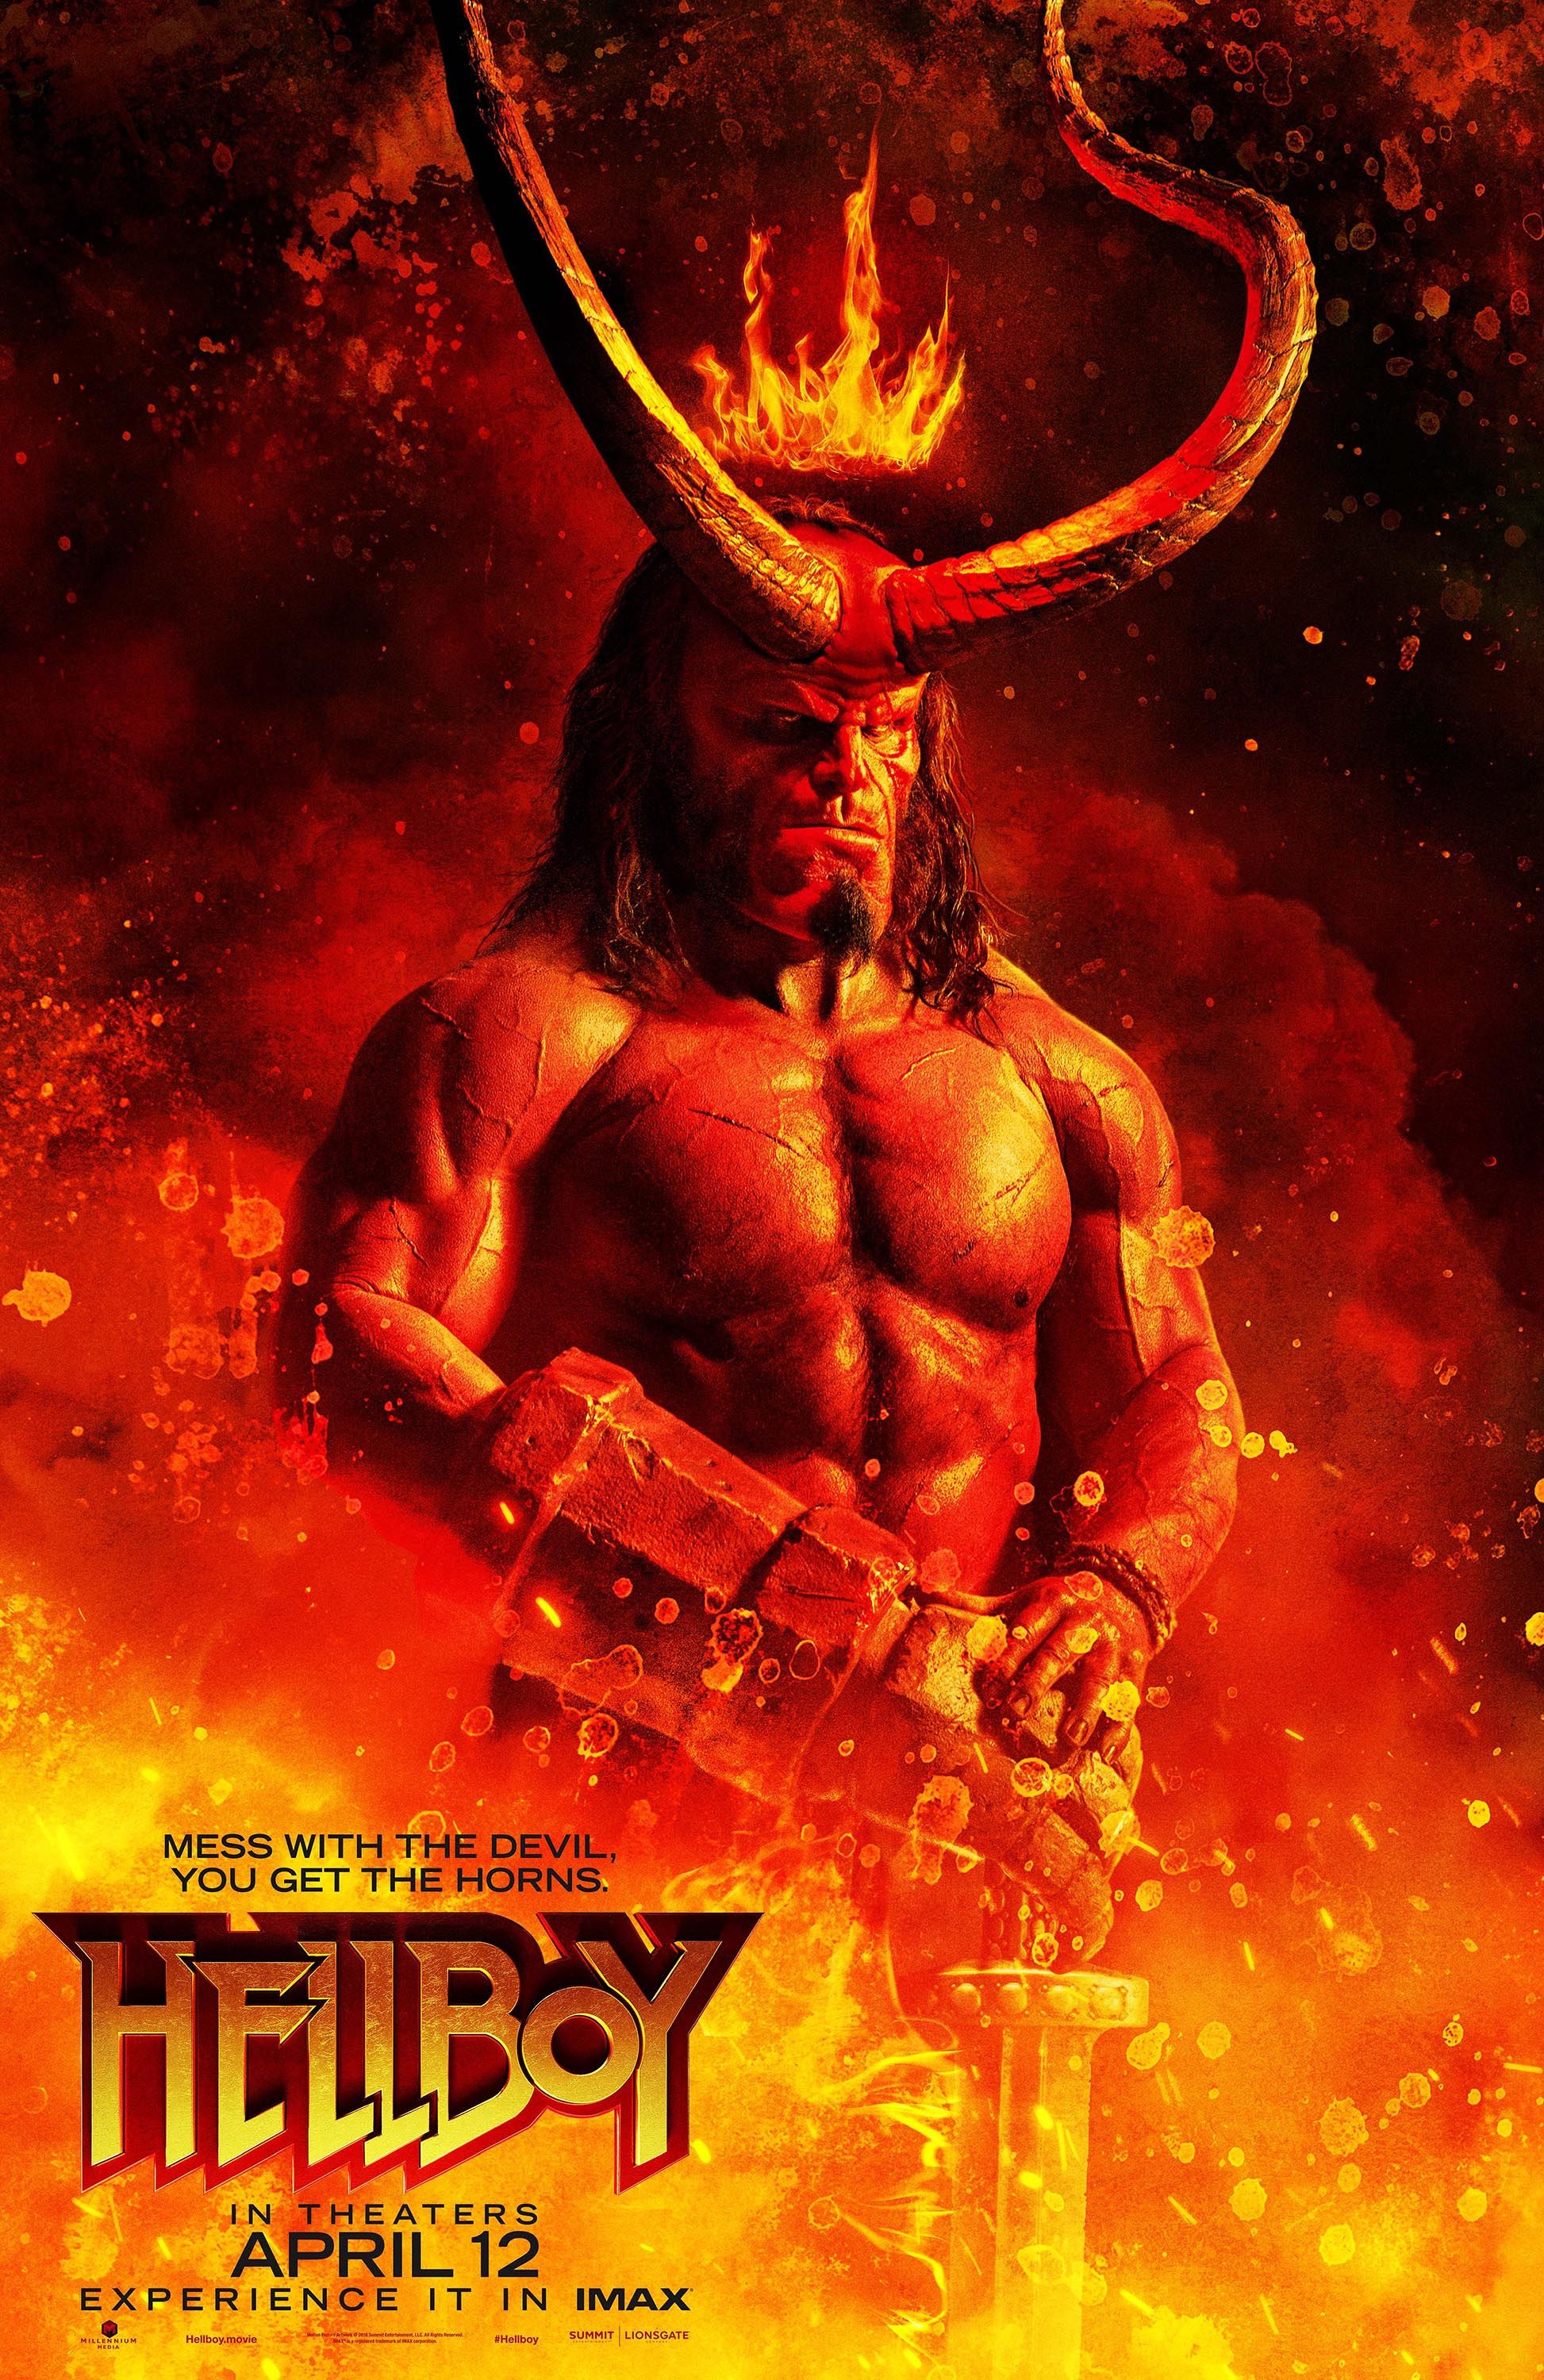 Hellboy - Hellboy 2019 Movie Poster , HD Wallpaper & Backgrounds